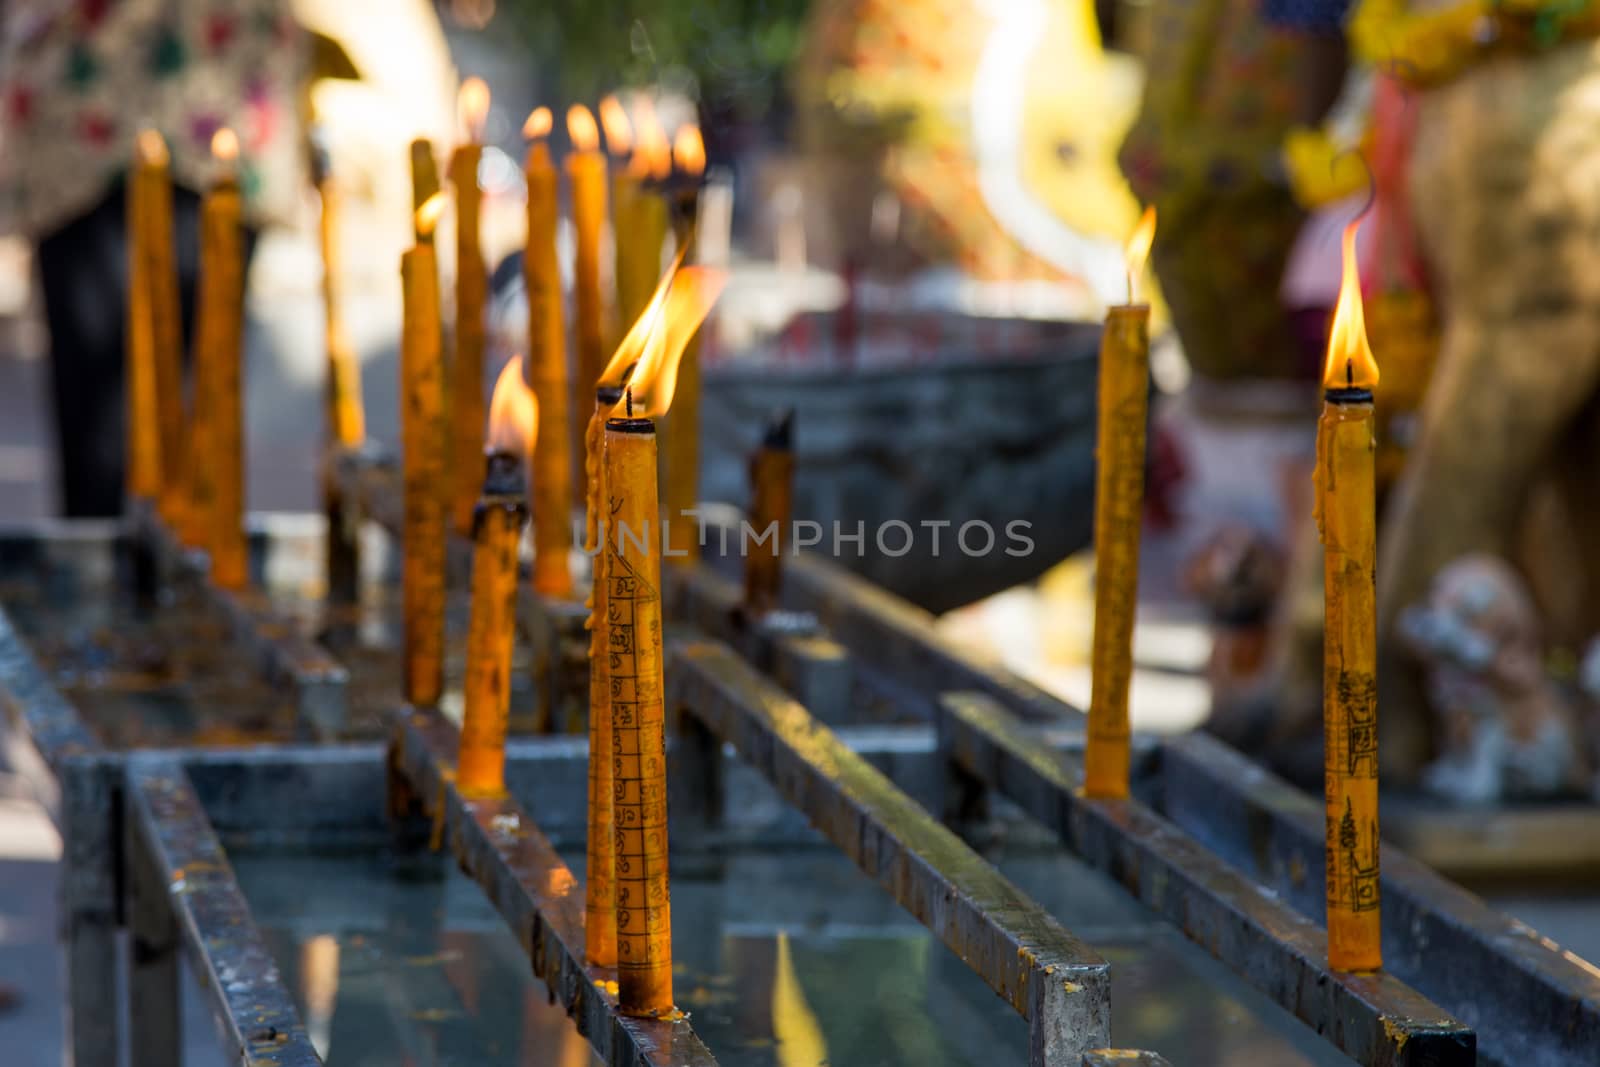 Thailand Ciang Mai Wat Ket Karem dog temple with votive lighted candles by kgboxford